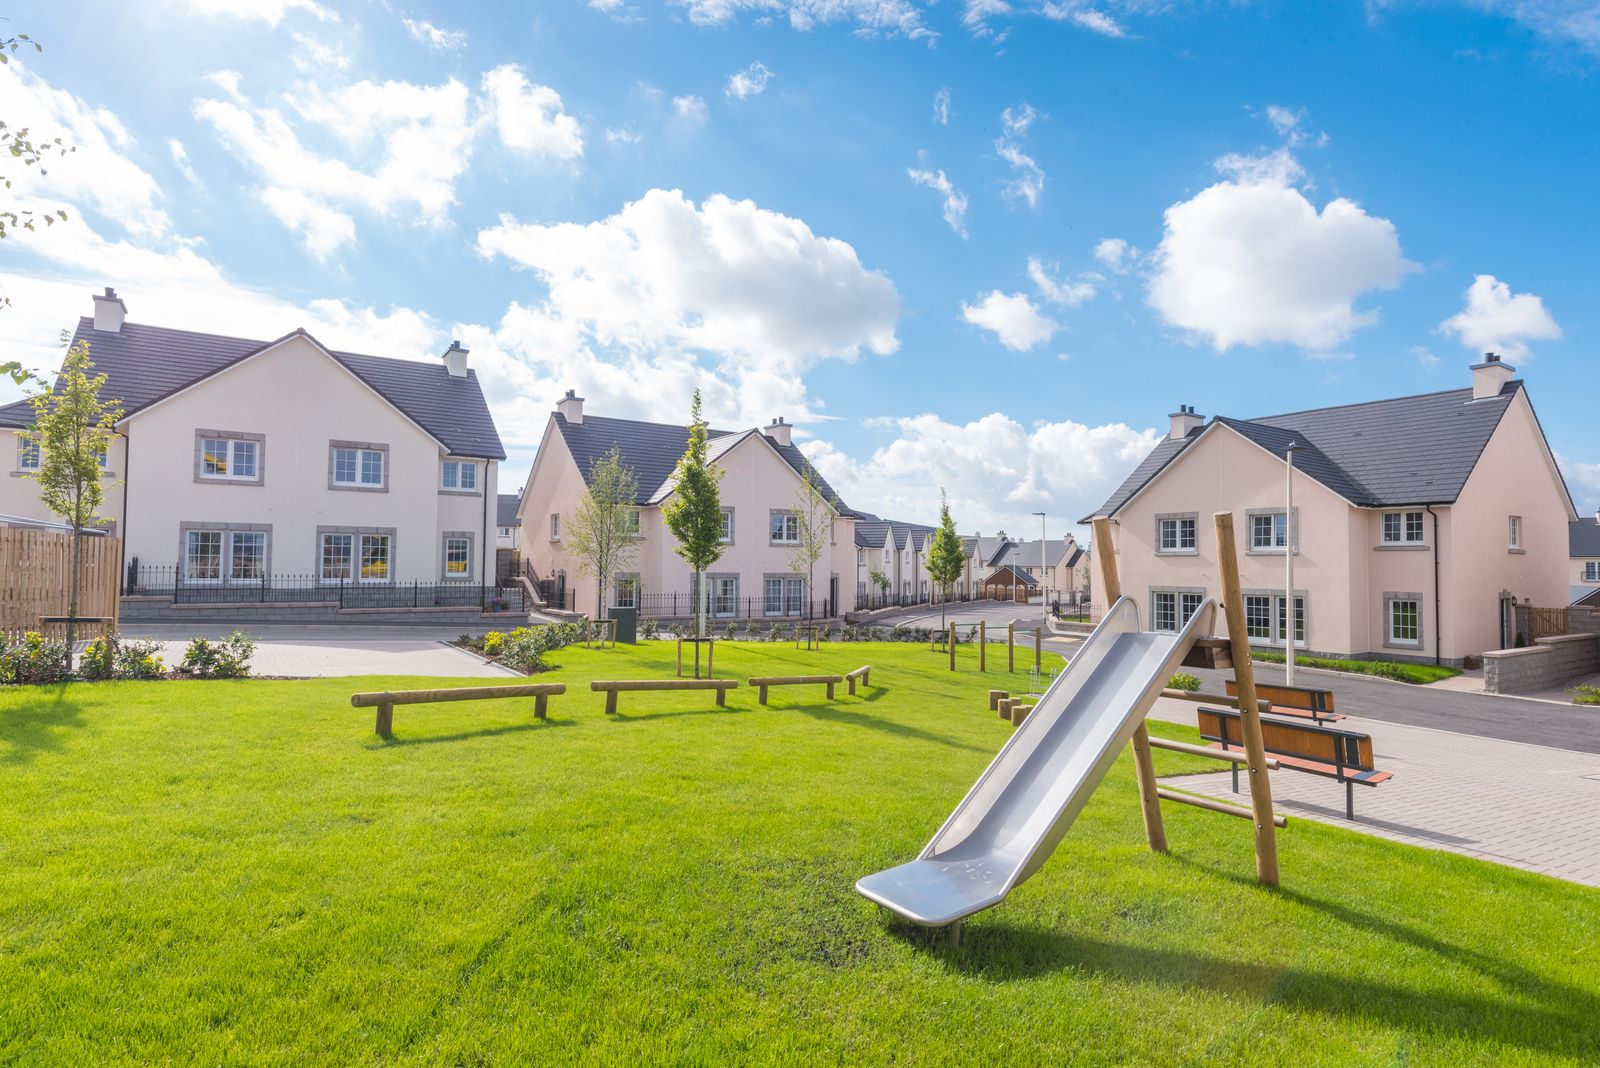 Site purchase confirmed for Cala's fourth phase at Grandhome development